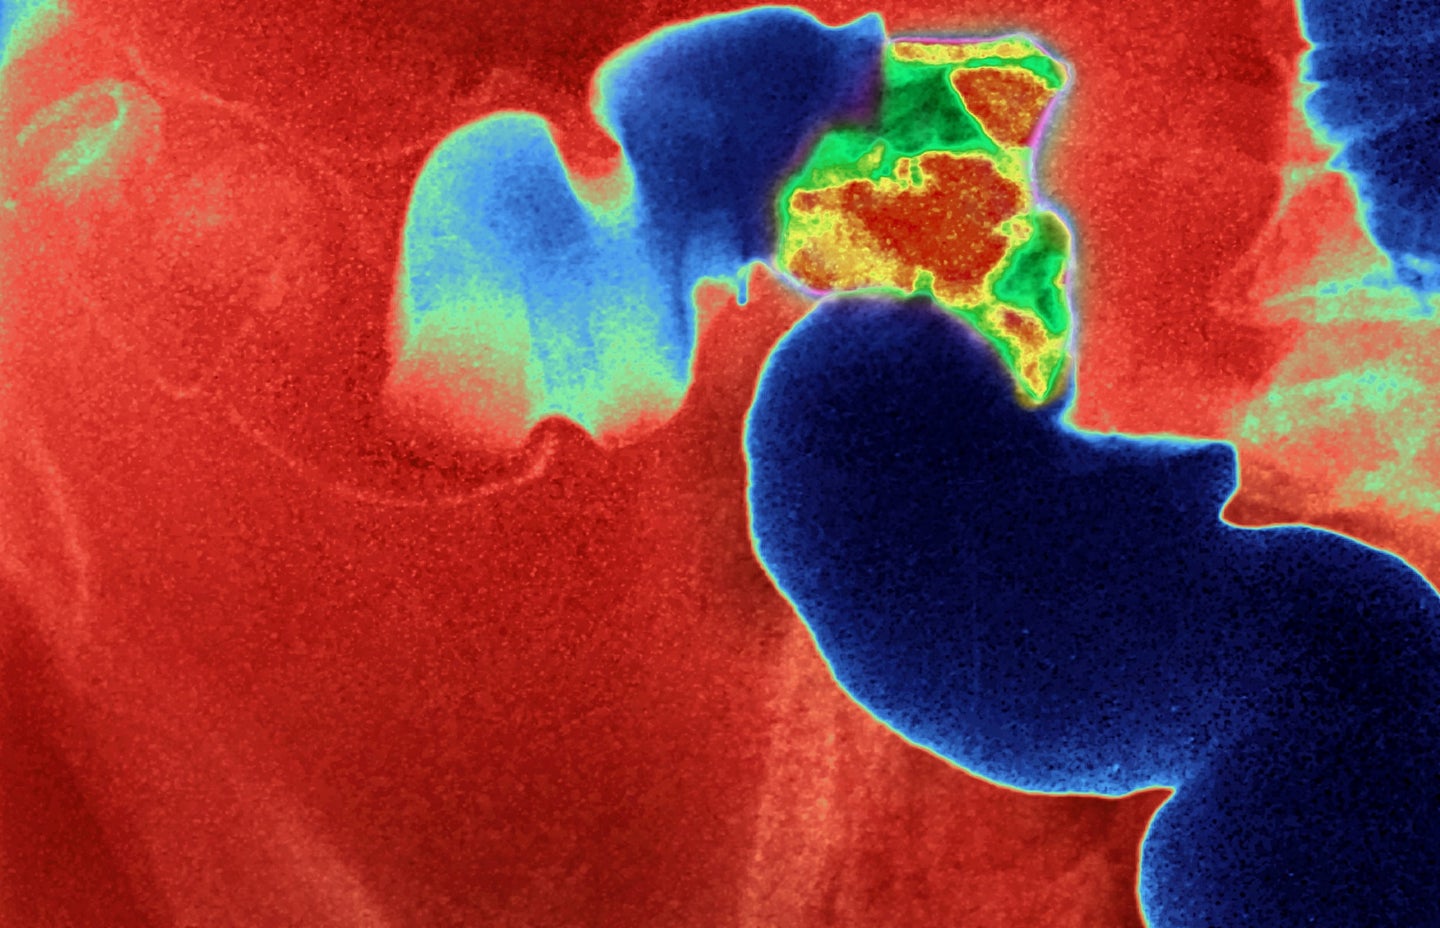 Colon cancer shown in abdominal X-ray in red, blue, and green